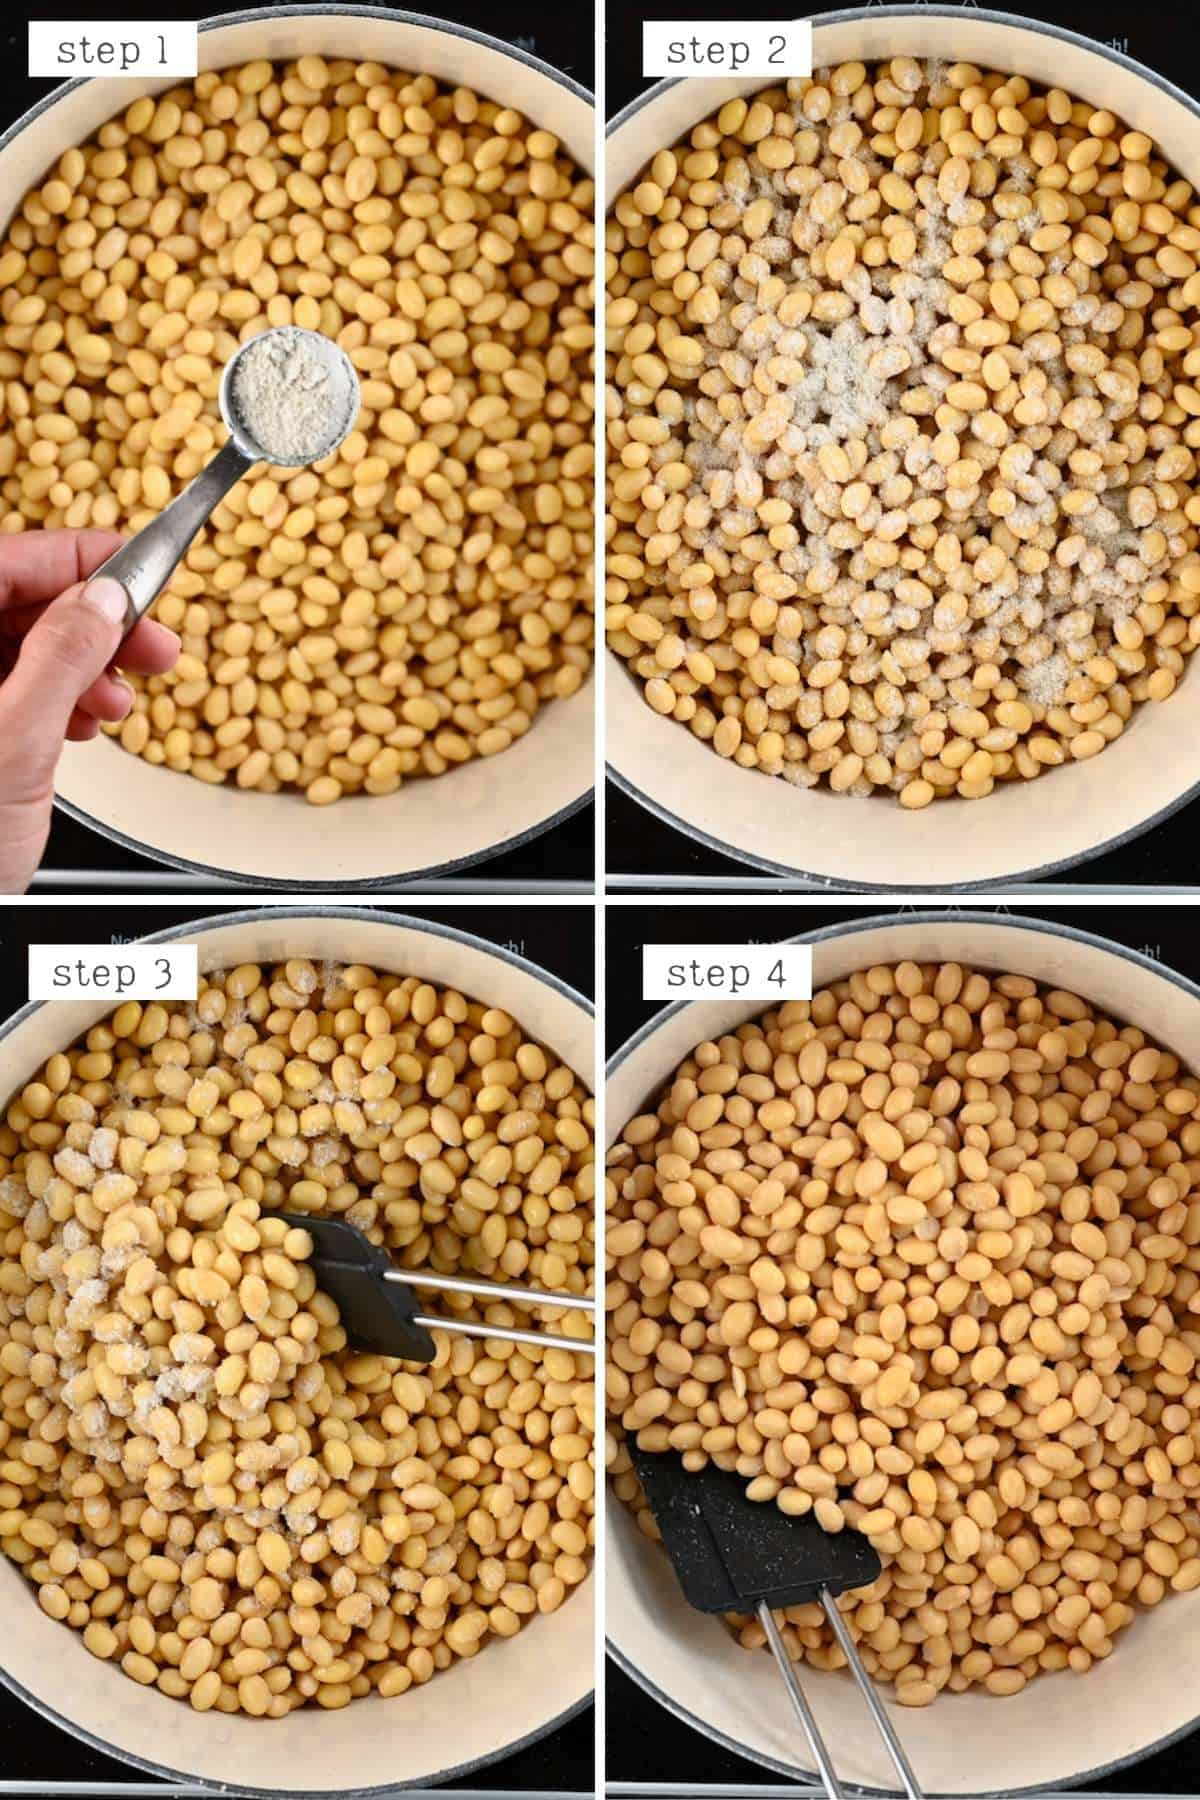 Steps for mixing tempeh starter into soybeans